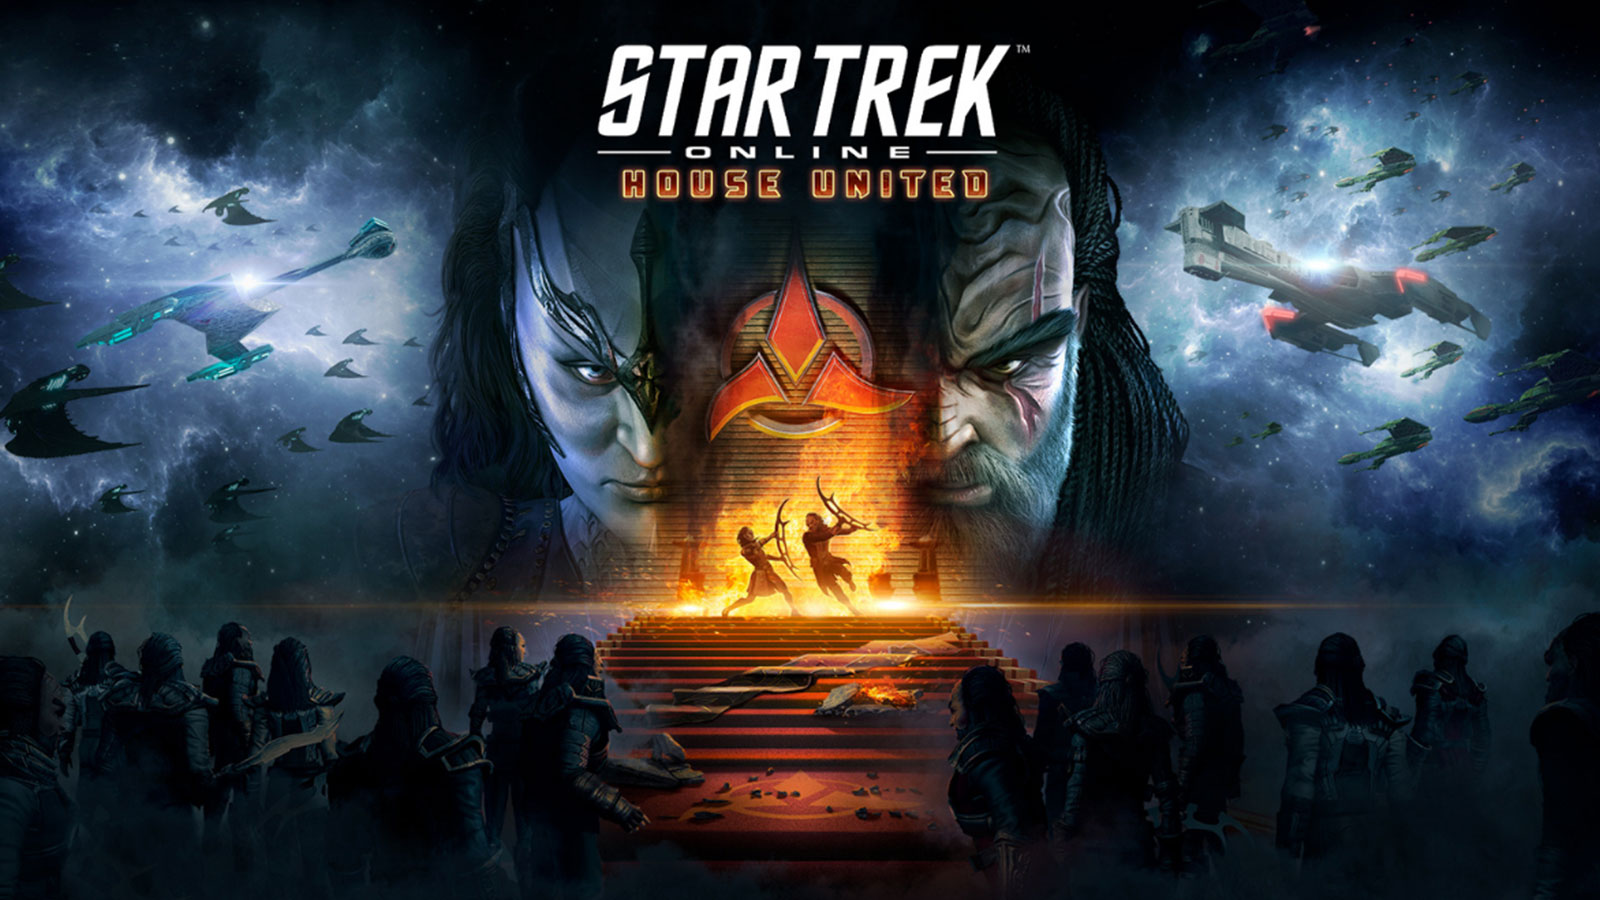 Star Trek Online Releases ‘House United’ For Playstation And X-Box + Mary Chieffo Returns As L’Rell With New Klingon Song